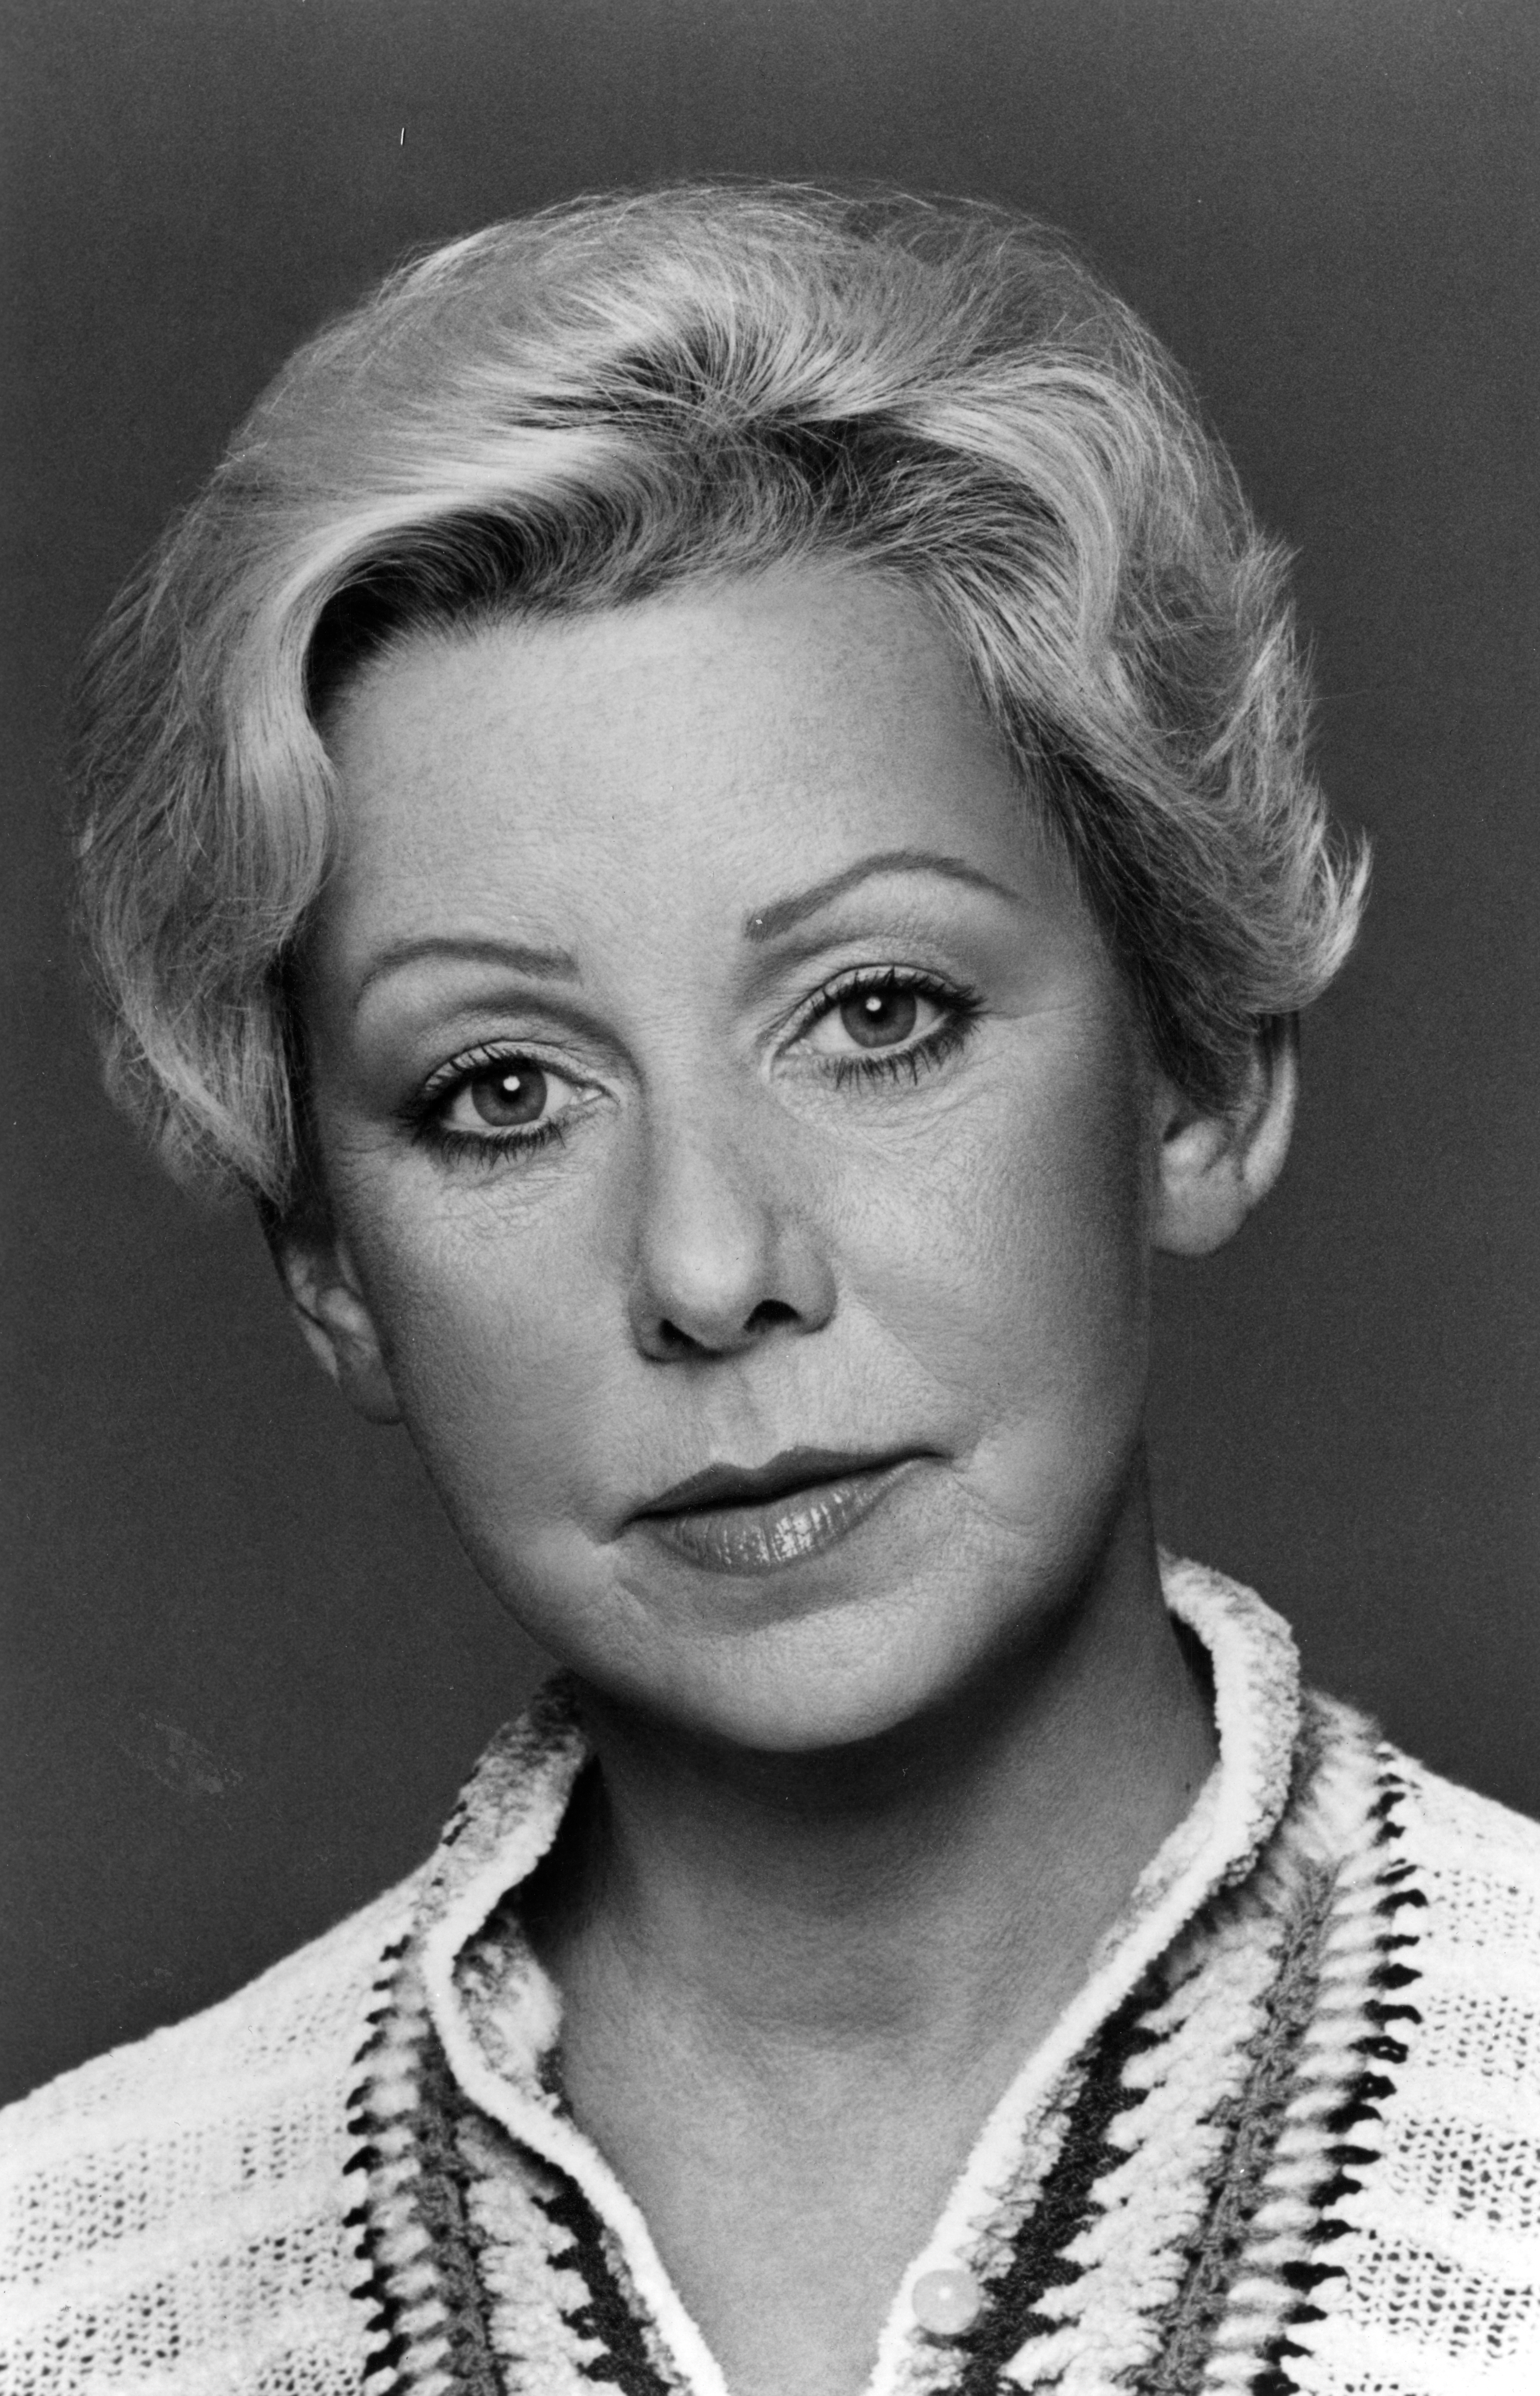 Portrait of American politician and mayor of Chicago Jane Byrne, early to mid 1980s. (Robert Abbott Sengstacke&mdash;Getty Images)